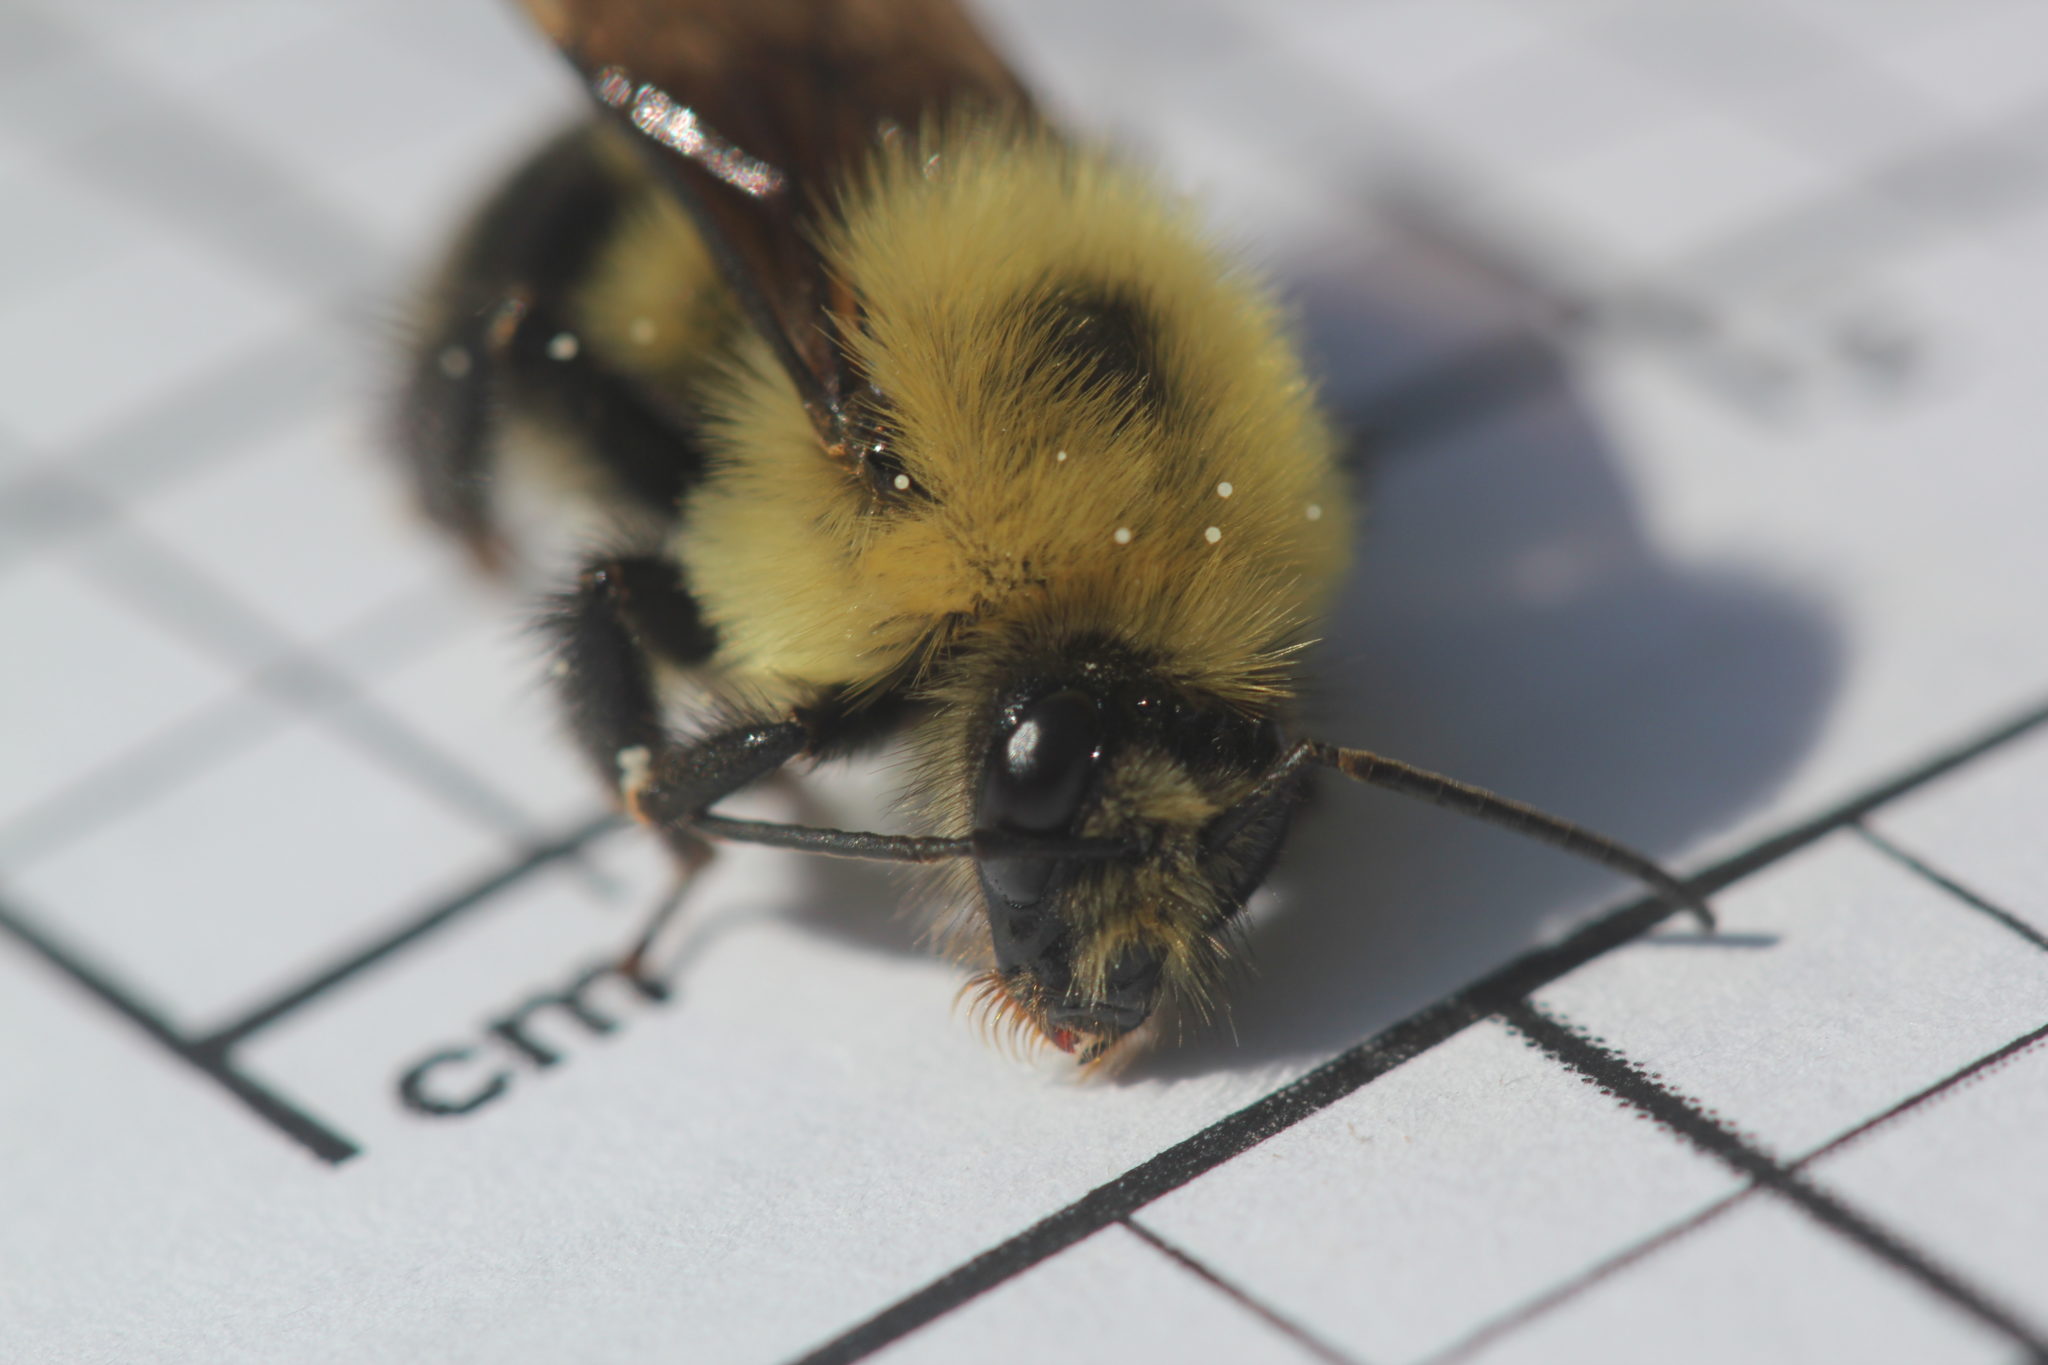 A black and yellow bee sits on a printed grid.